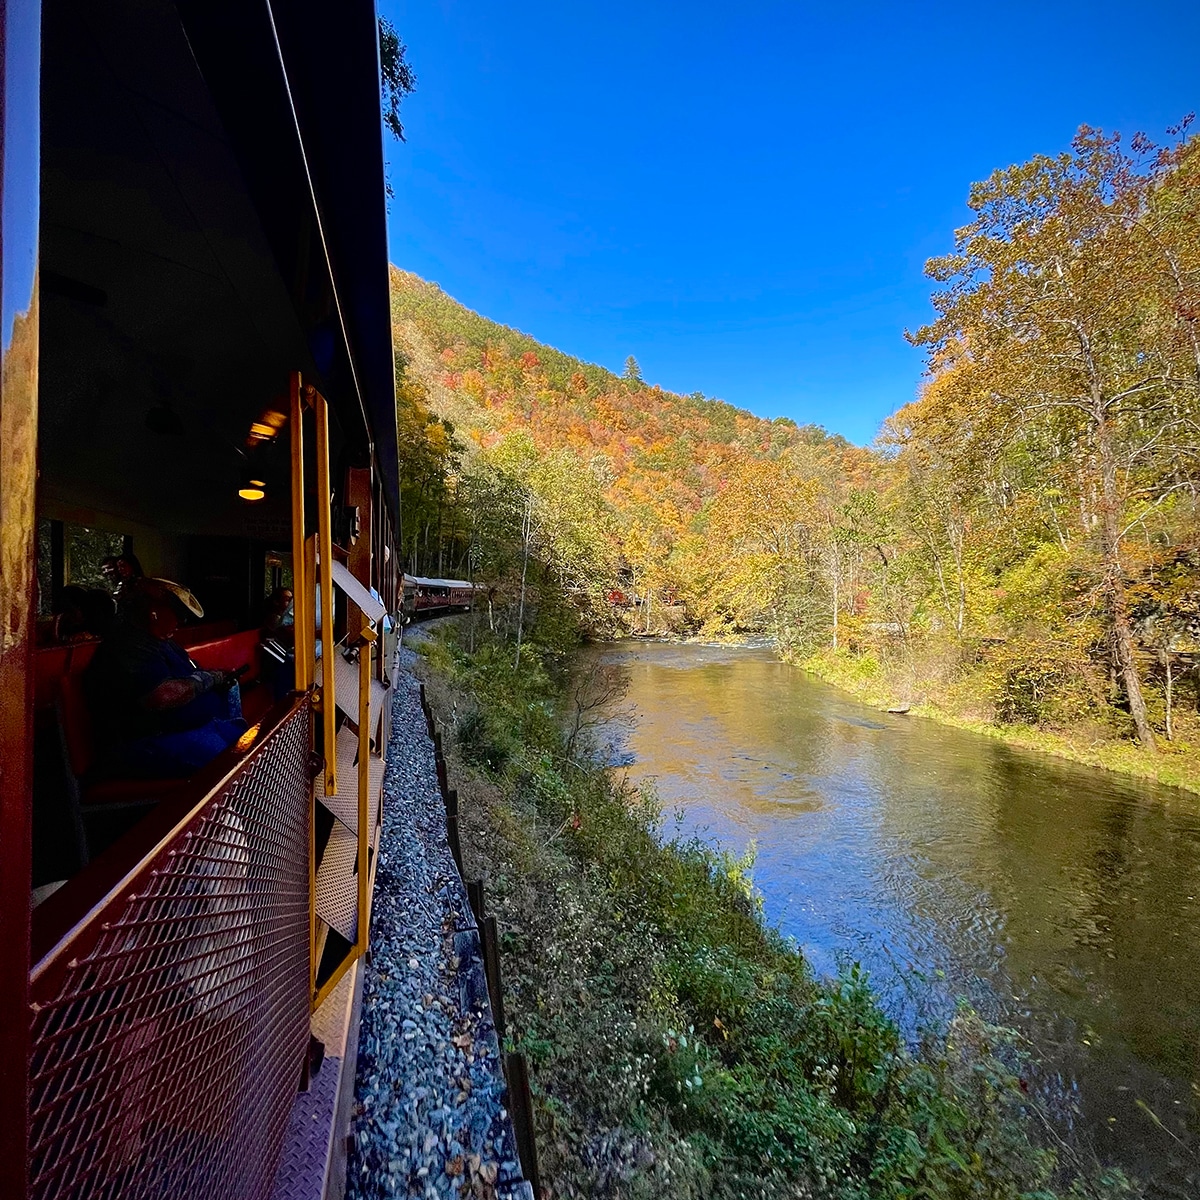 Looking out the open window of the Great Smoky Mountain Railroad to view the back of the train as it rides along the Nantahala River.